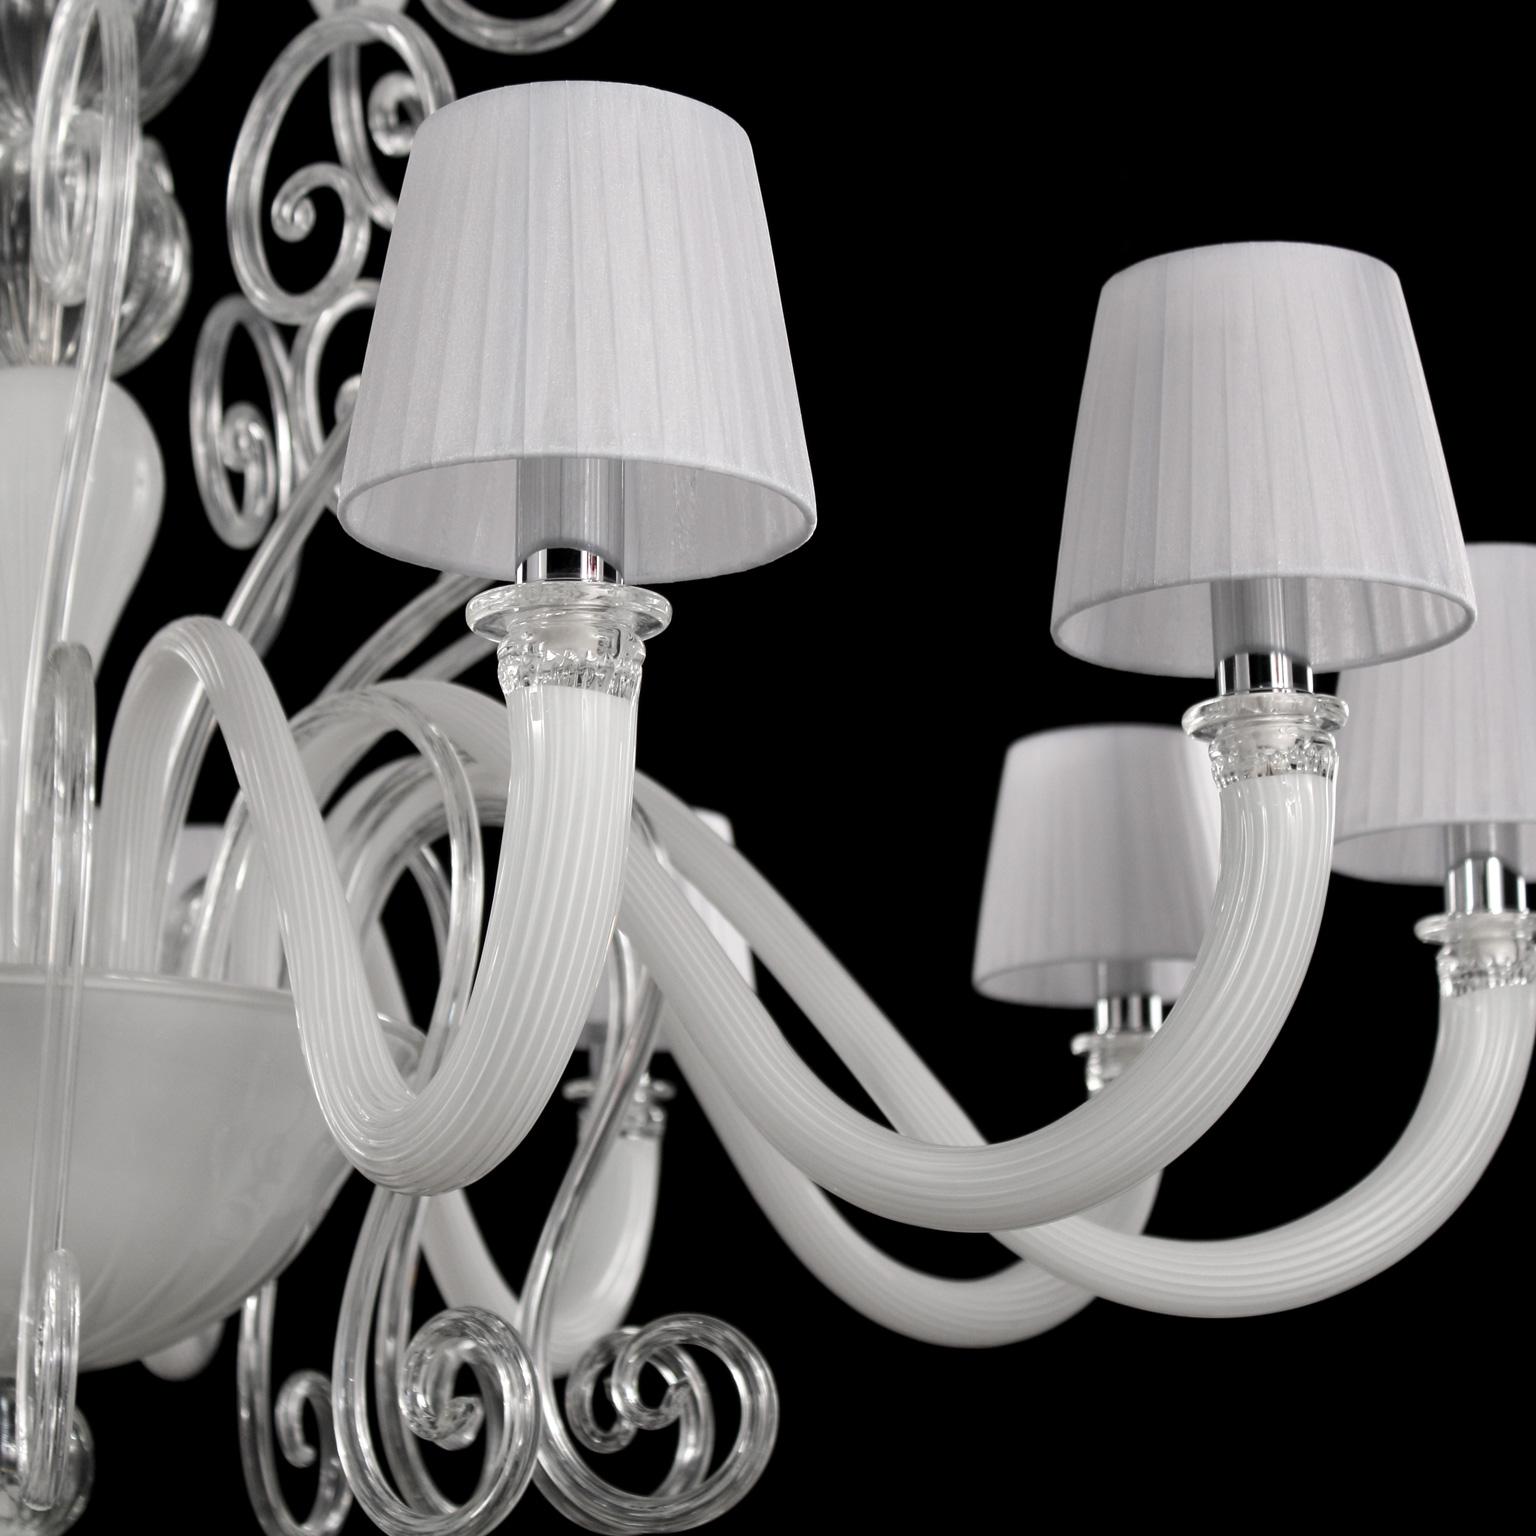 Italian Artistic Chandelier 12+6 arms White Crystal Murano Glass Gatsby by Multiforme For Sale